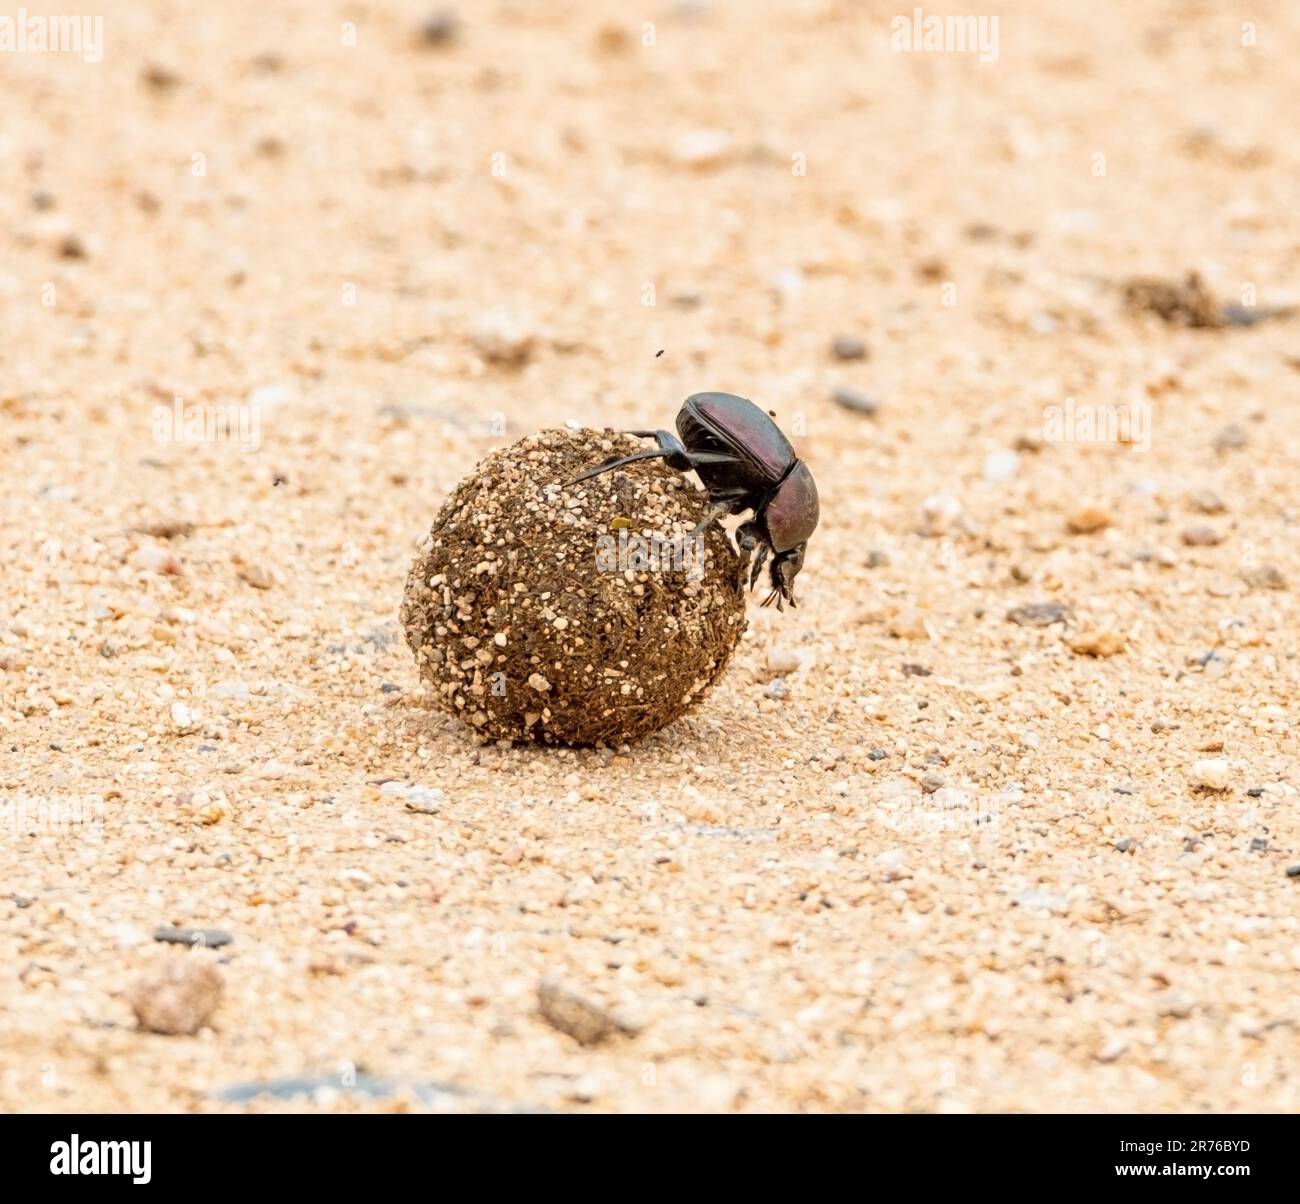 Dung Beetles rolling a dung ball in Southern African savannah Stock Photo